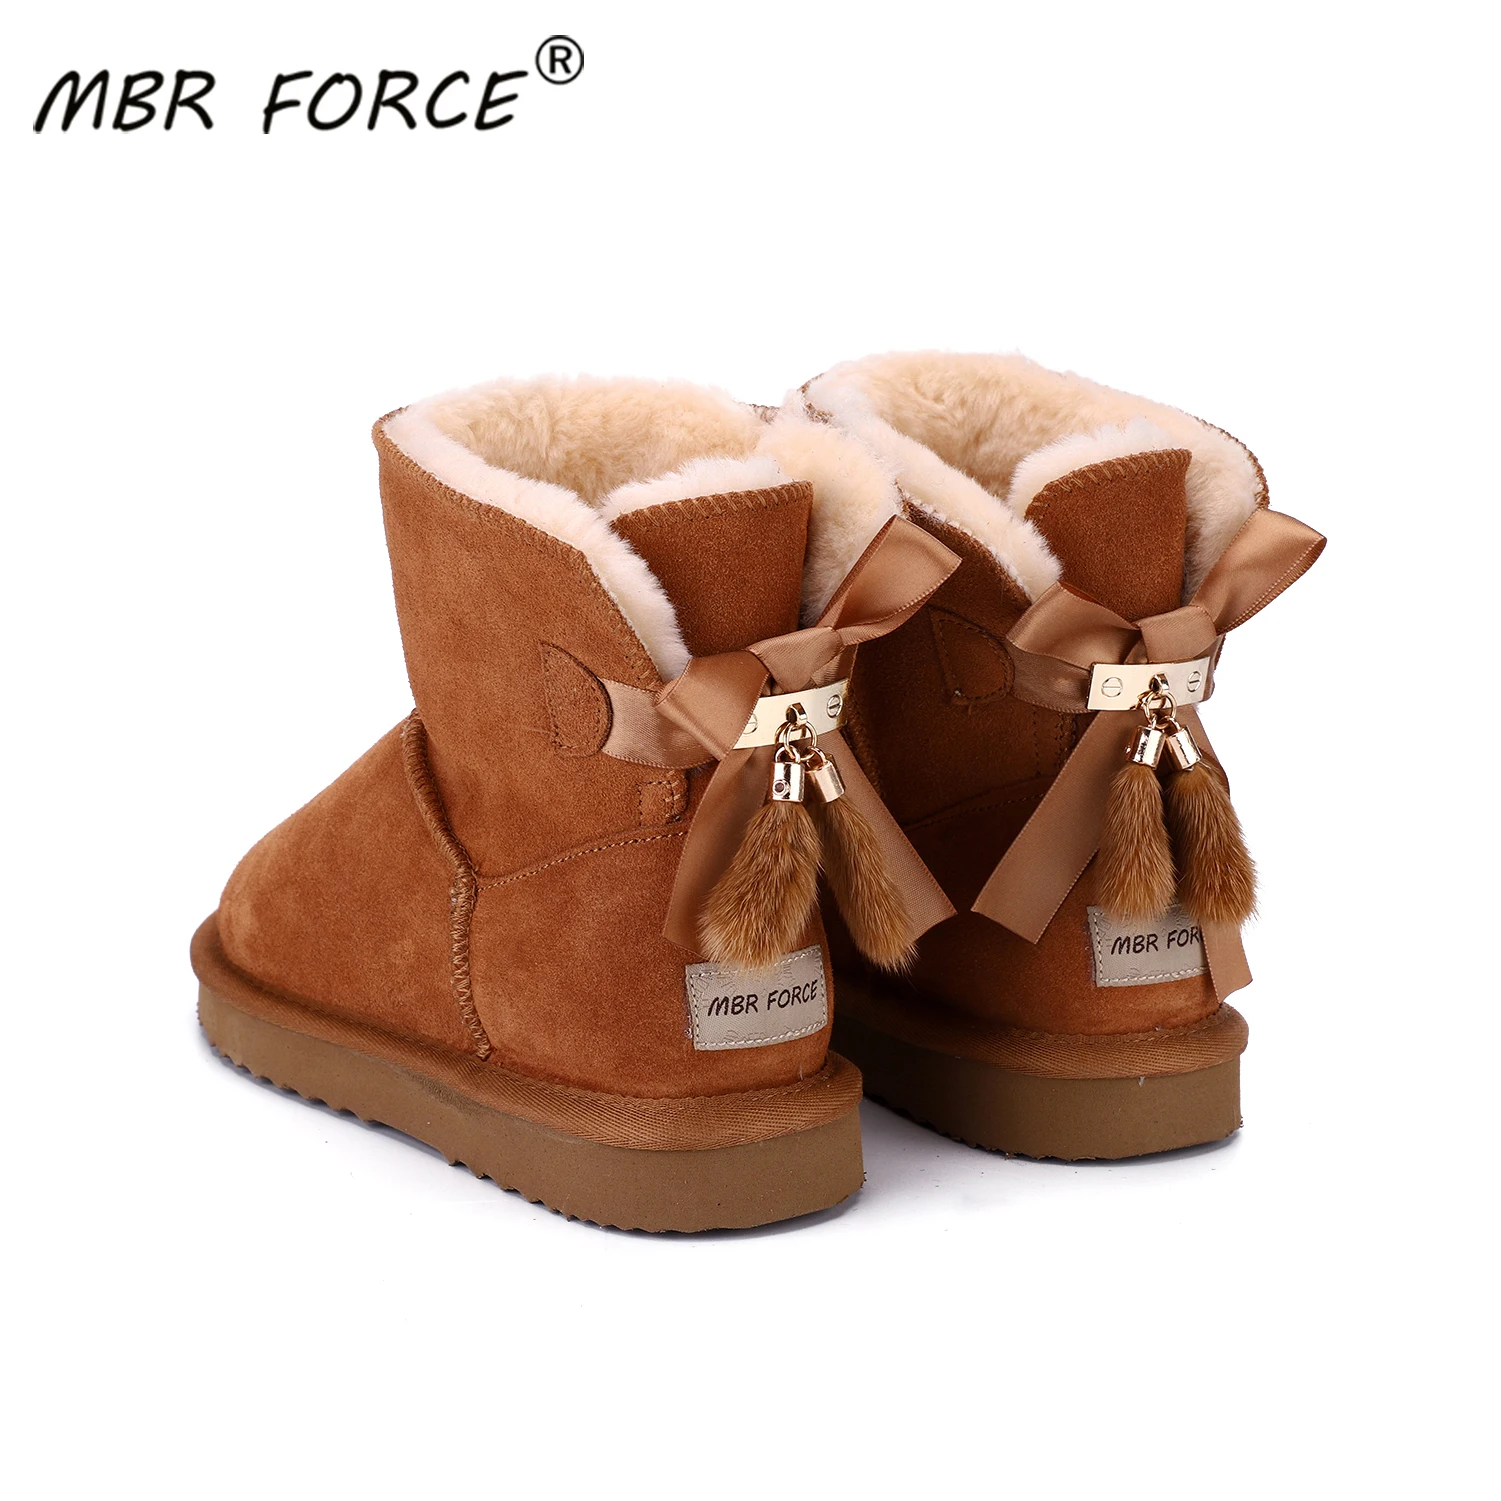 MBR FORCE Cowhide Leather Short plush Fur Lined Women Short Ankle Winter Suede Snow Boots with Bowknots Mink Tassels Warm Shoes